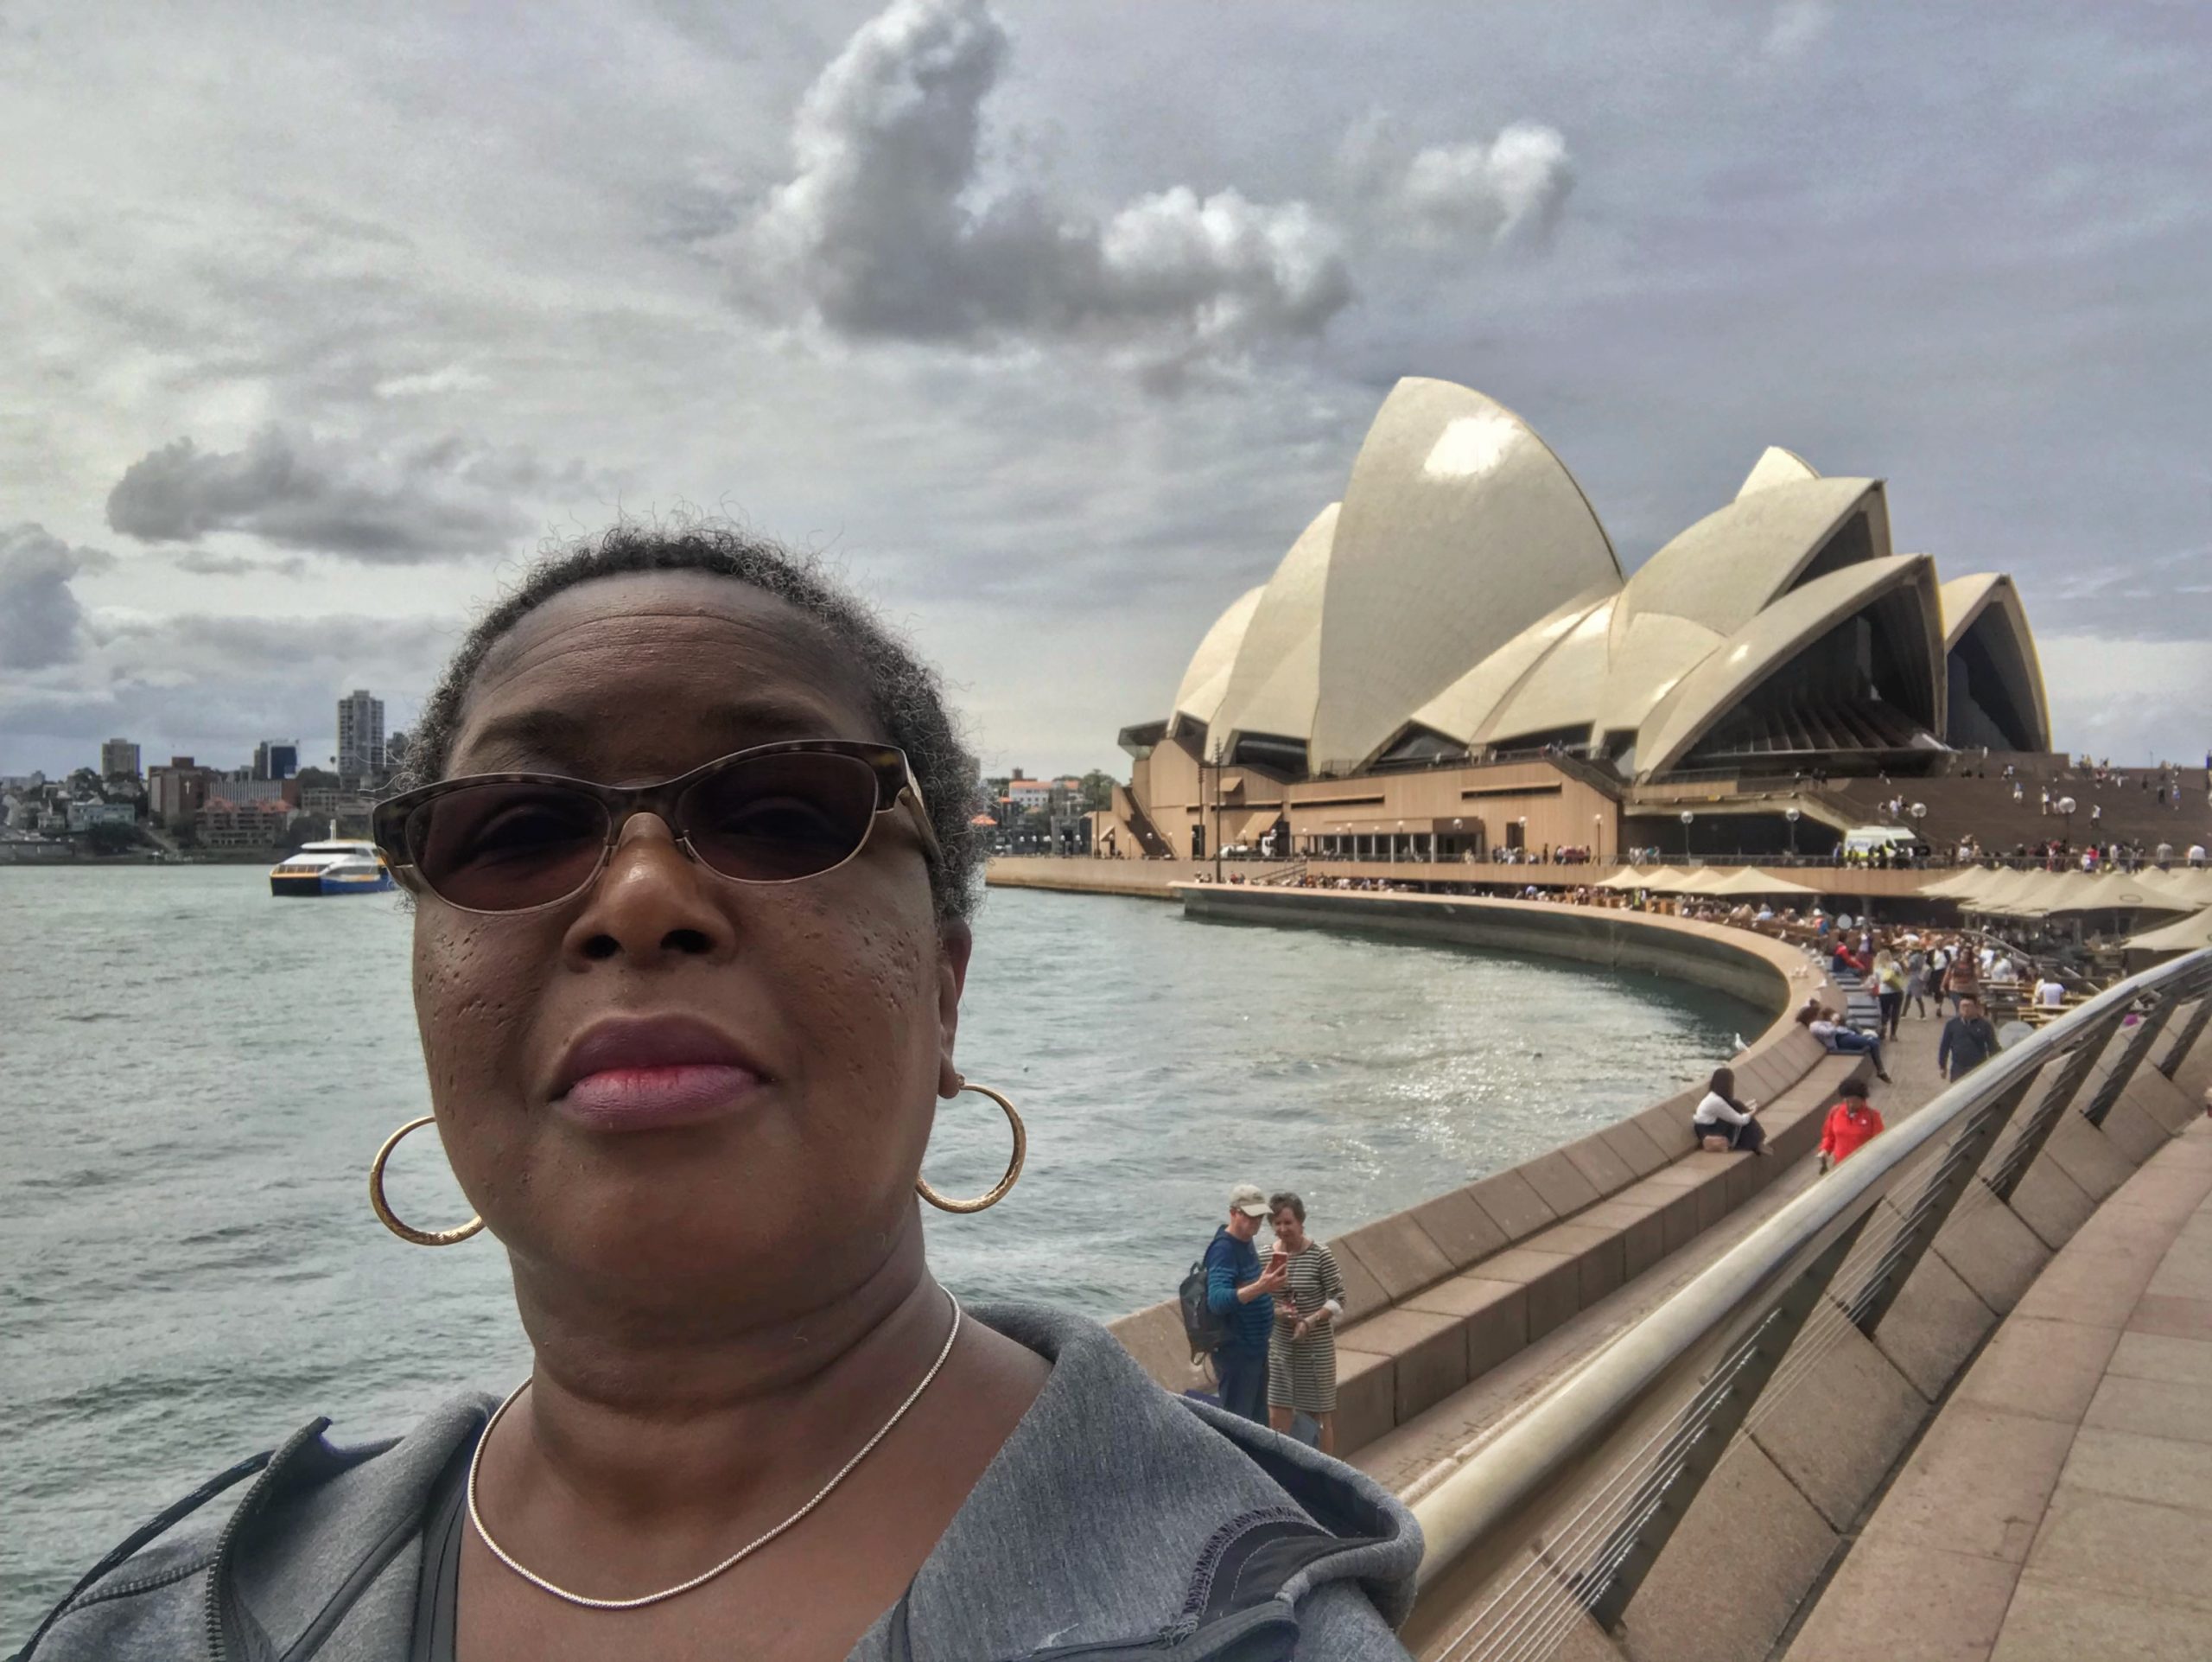 Danielle Lewis, owner of SelfishMe Travel LLC, at the Sydney Opera House in Sydney, Australia - image taken with an iPhone 7